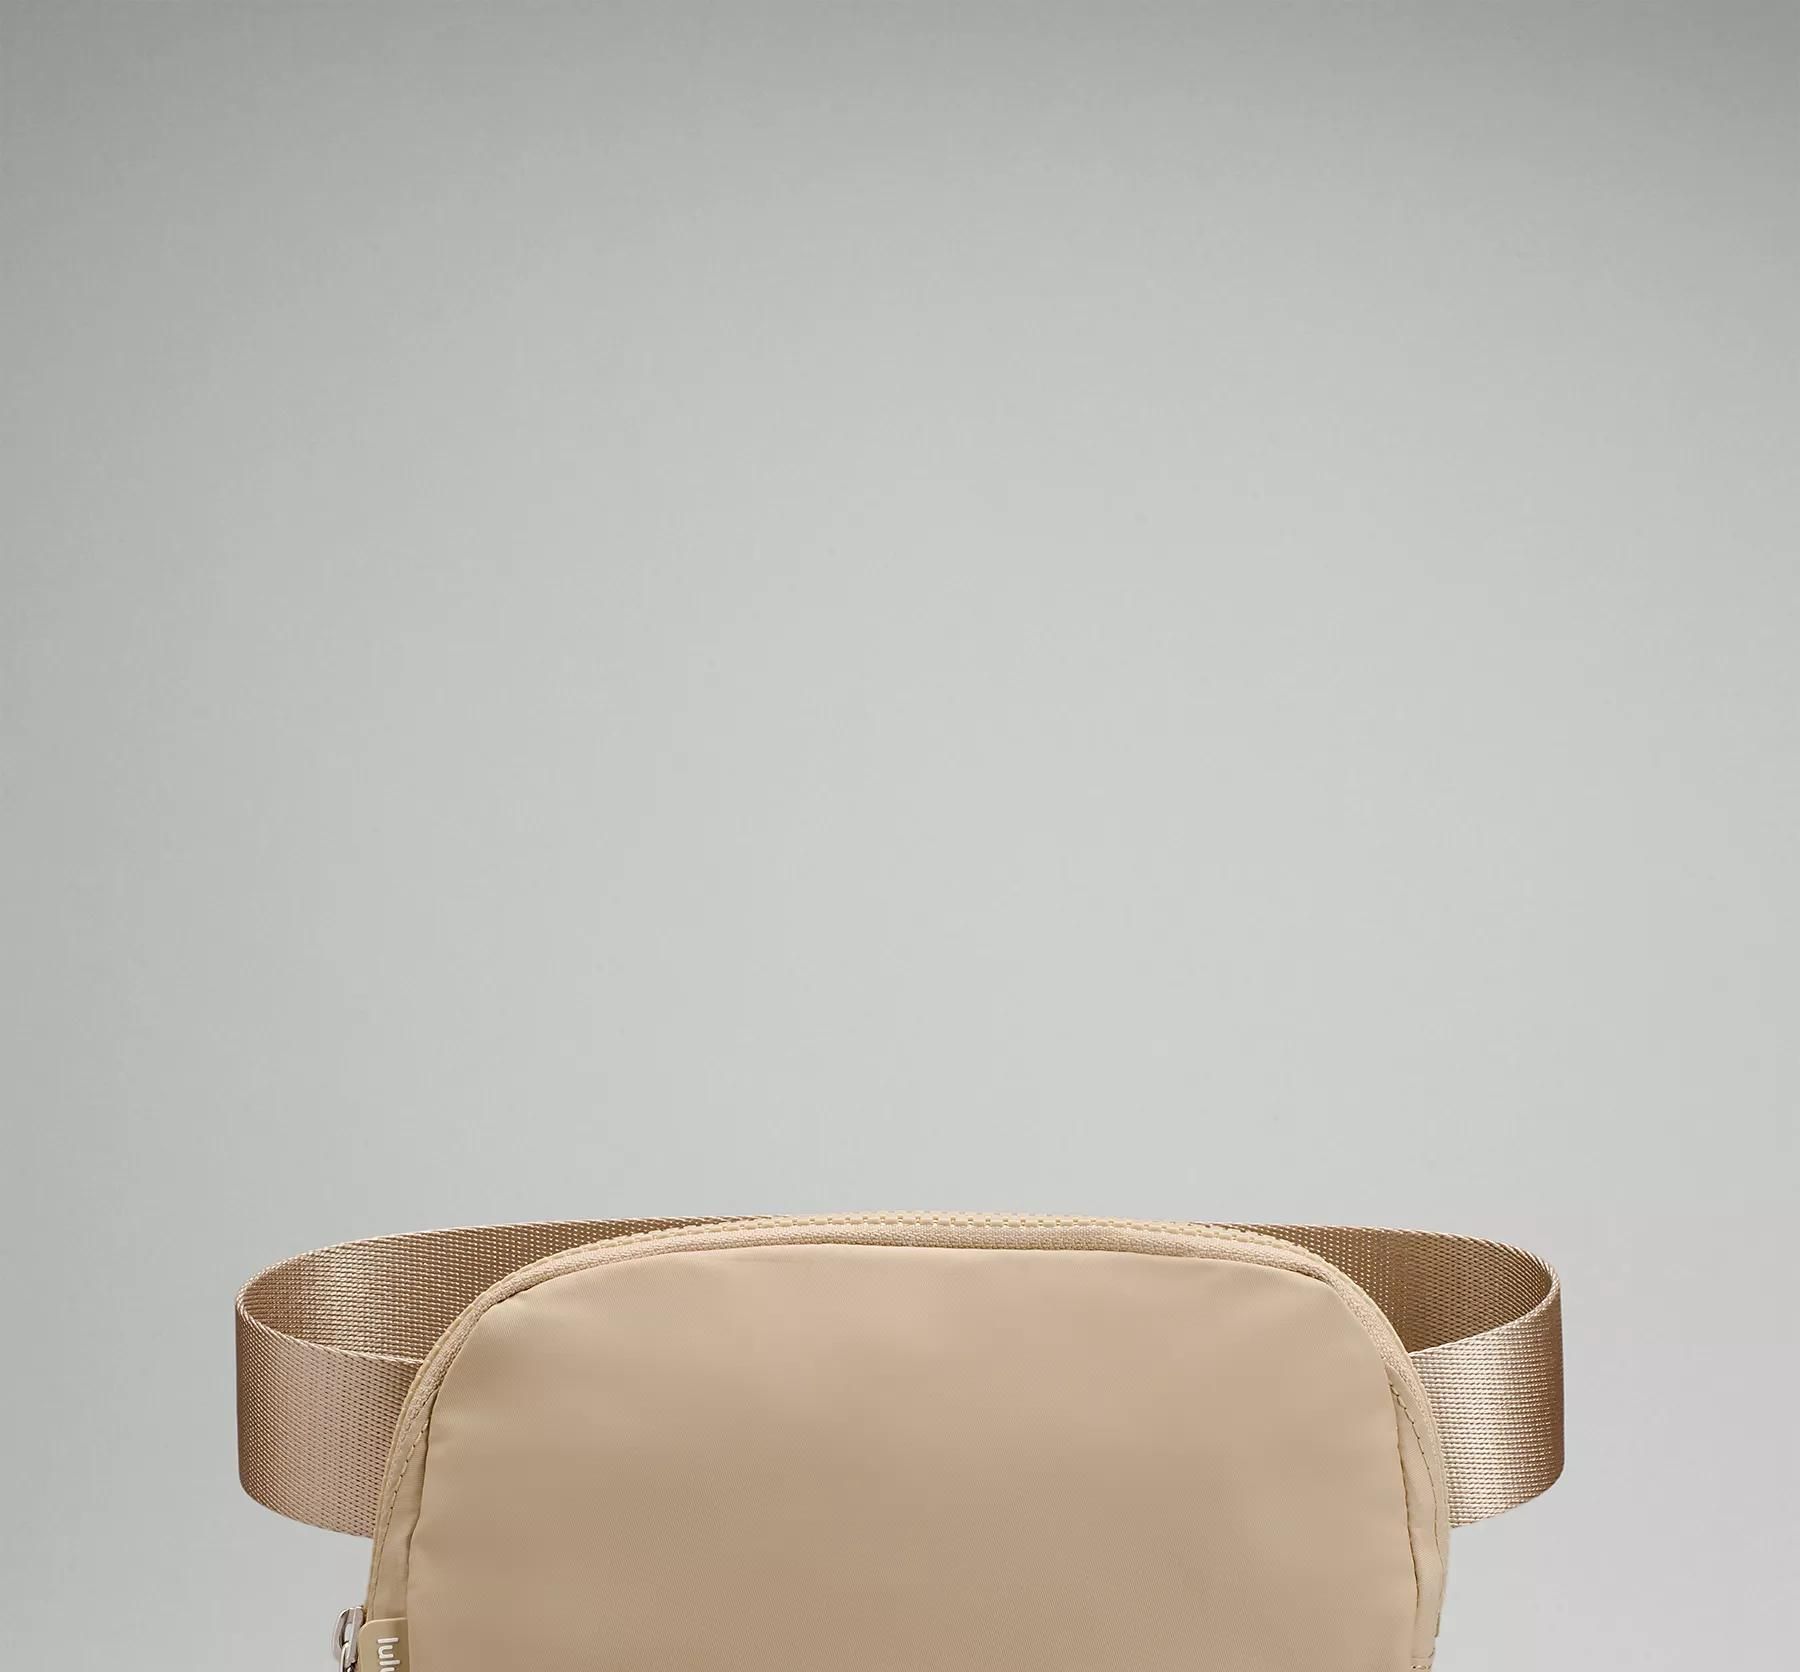 A Belt Bag That Shoppers Wear 'Everywhere' Is Trending at